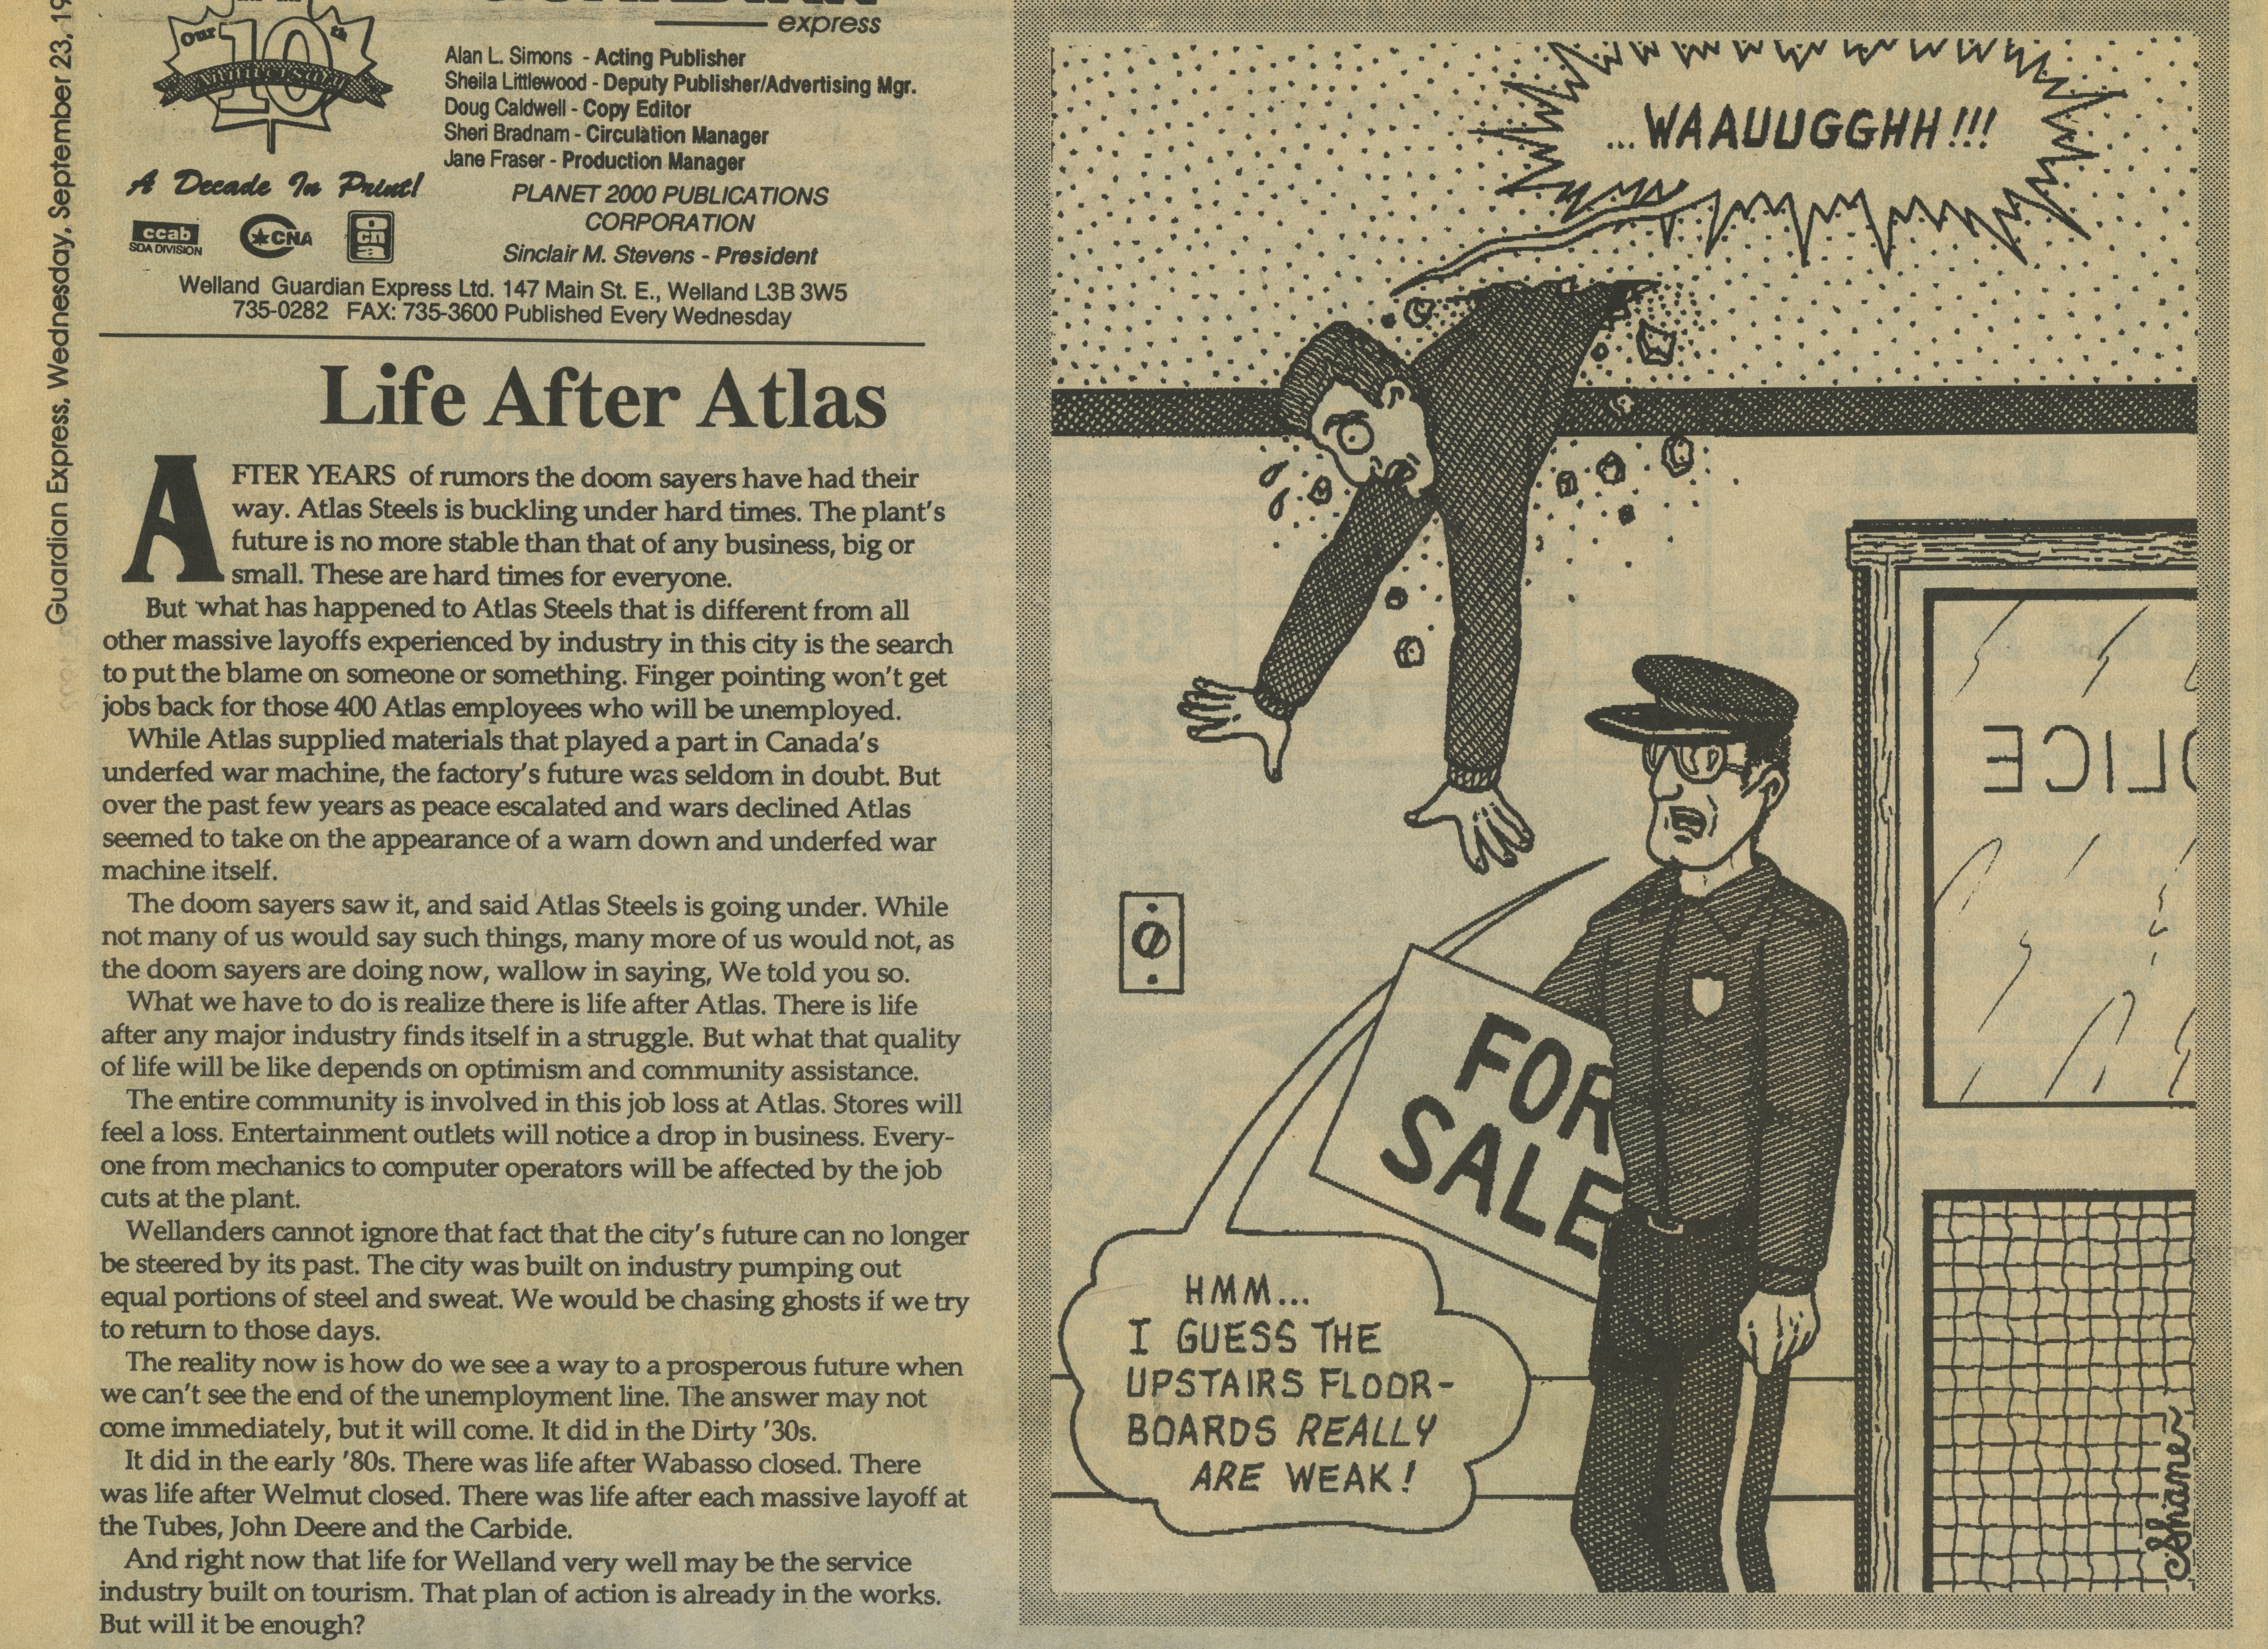 An article titled "Life after atlas". Next to it is a cartoon showing a man falling through the ceiling, and a police officer underneath saying "Hmm... I guess the upstairs floor-boards really are weak!"